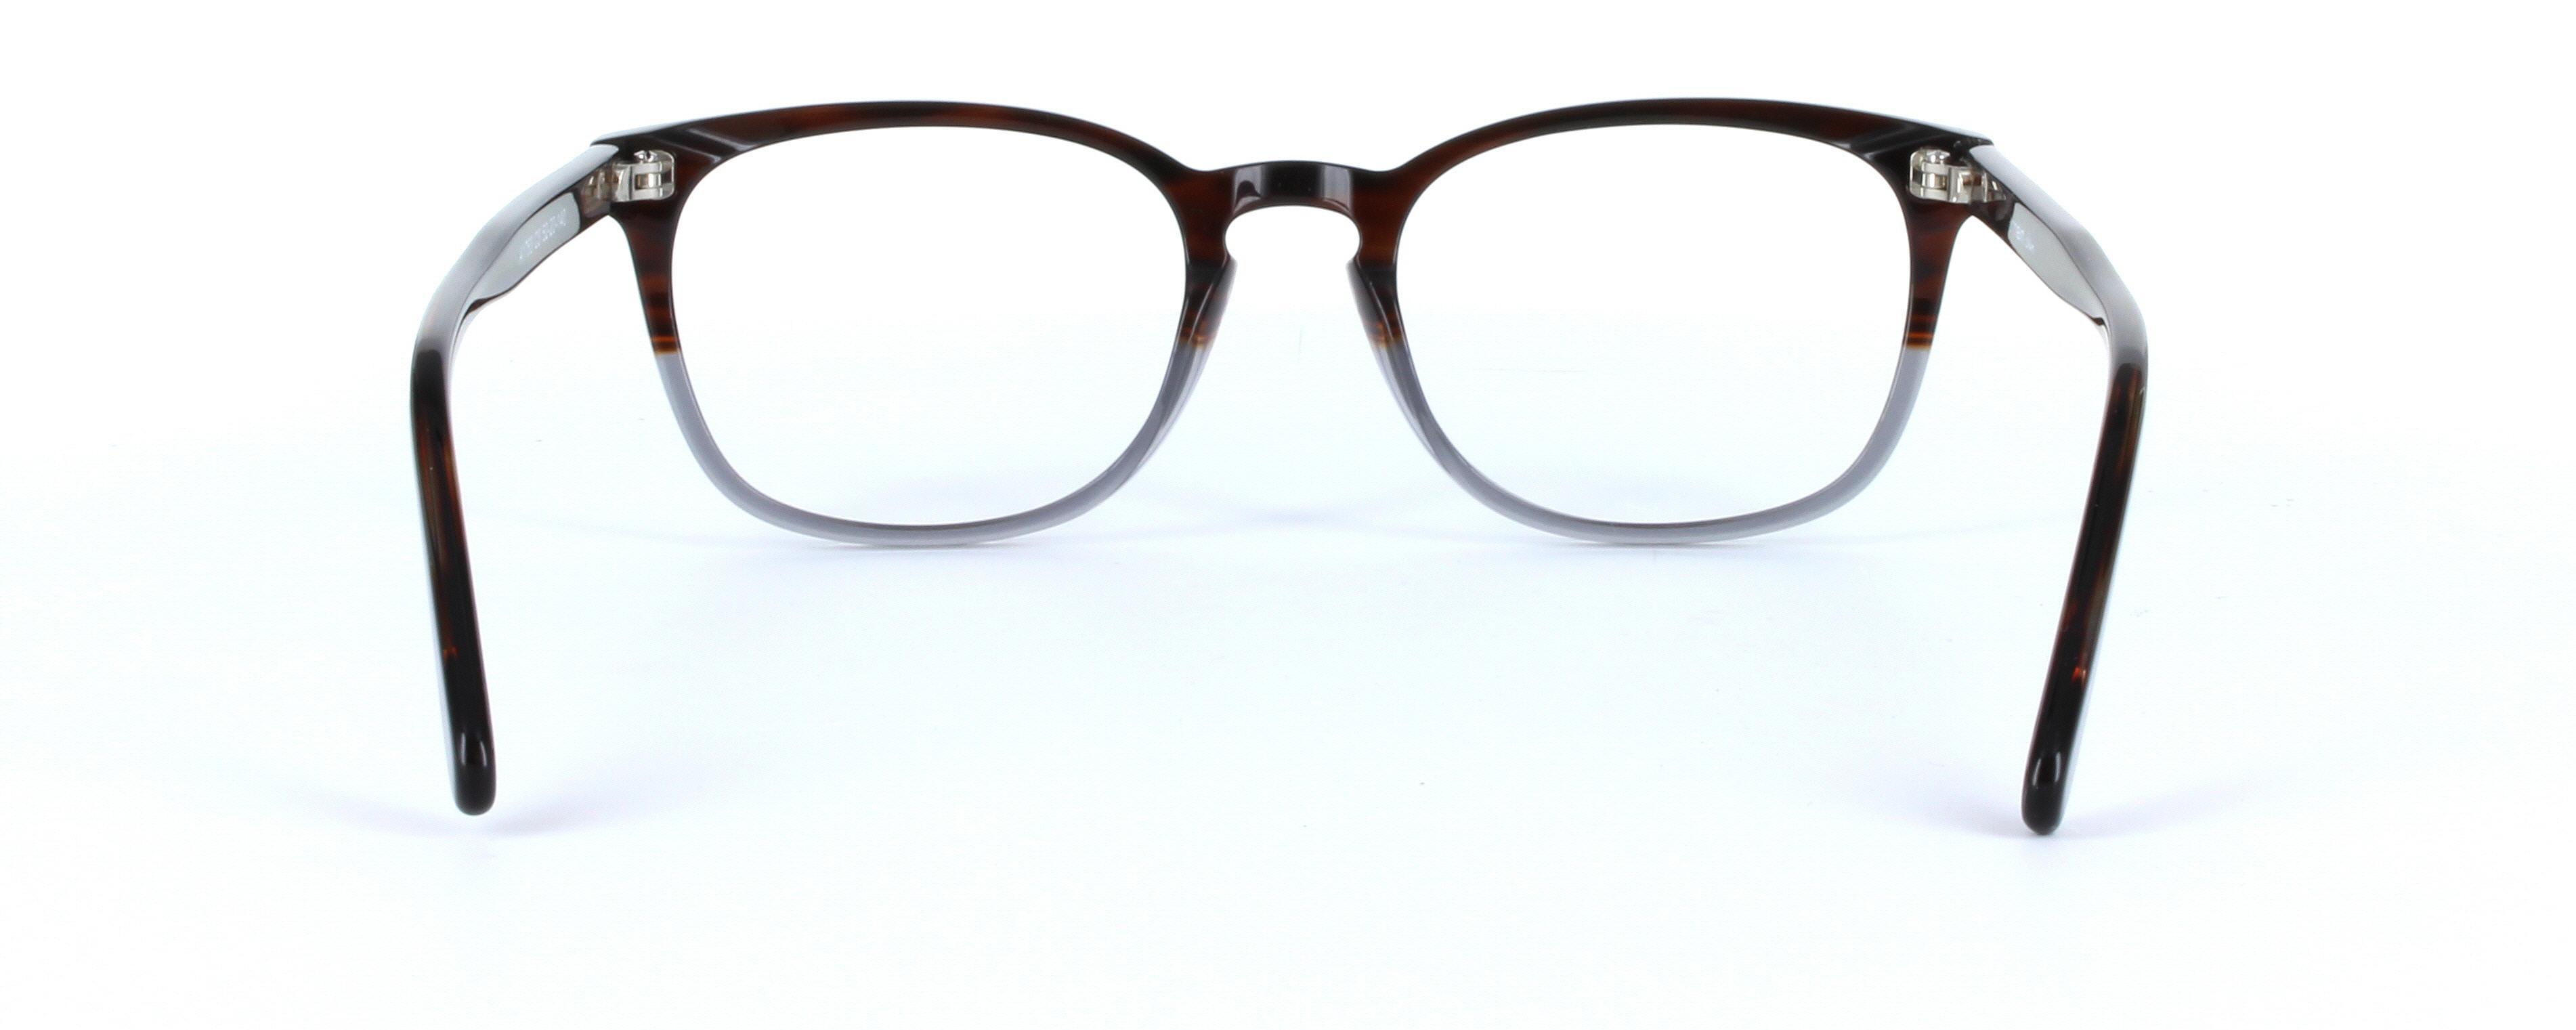 Comet Brown and Grey Full Rim Oval Plastic Glasses - Image View 3